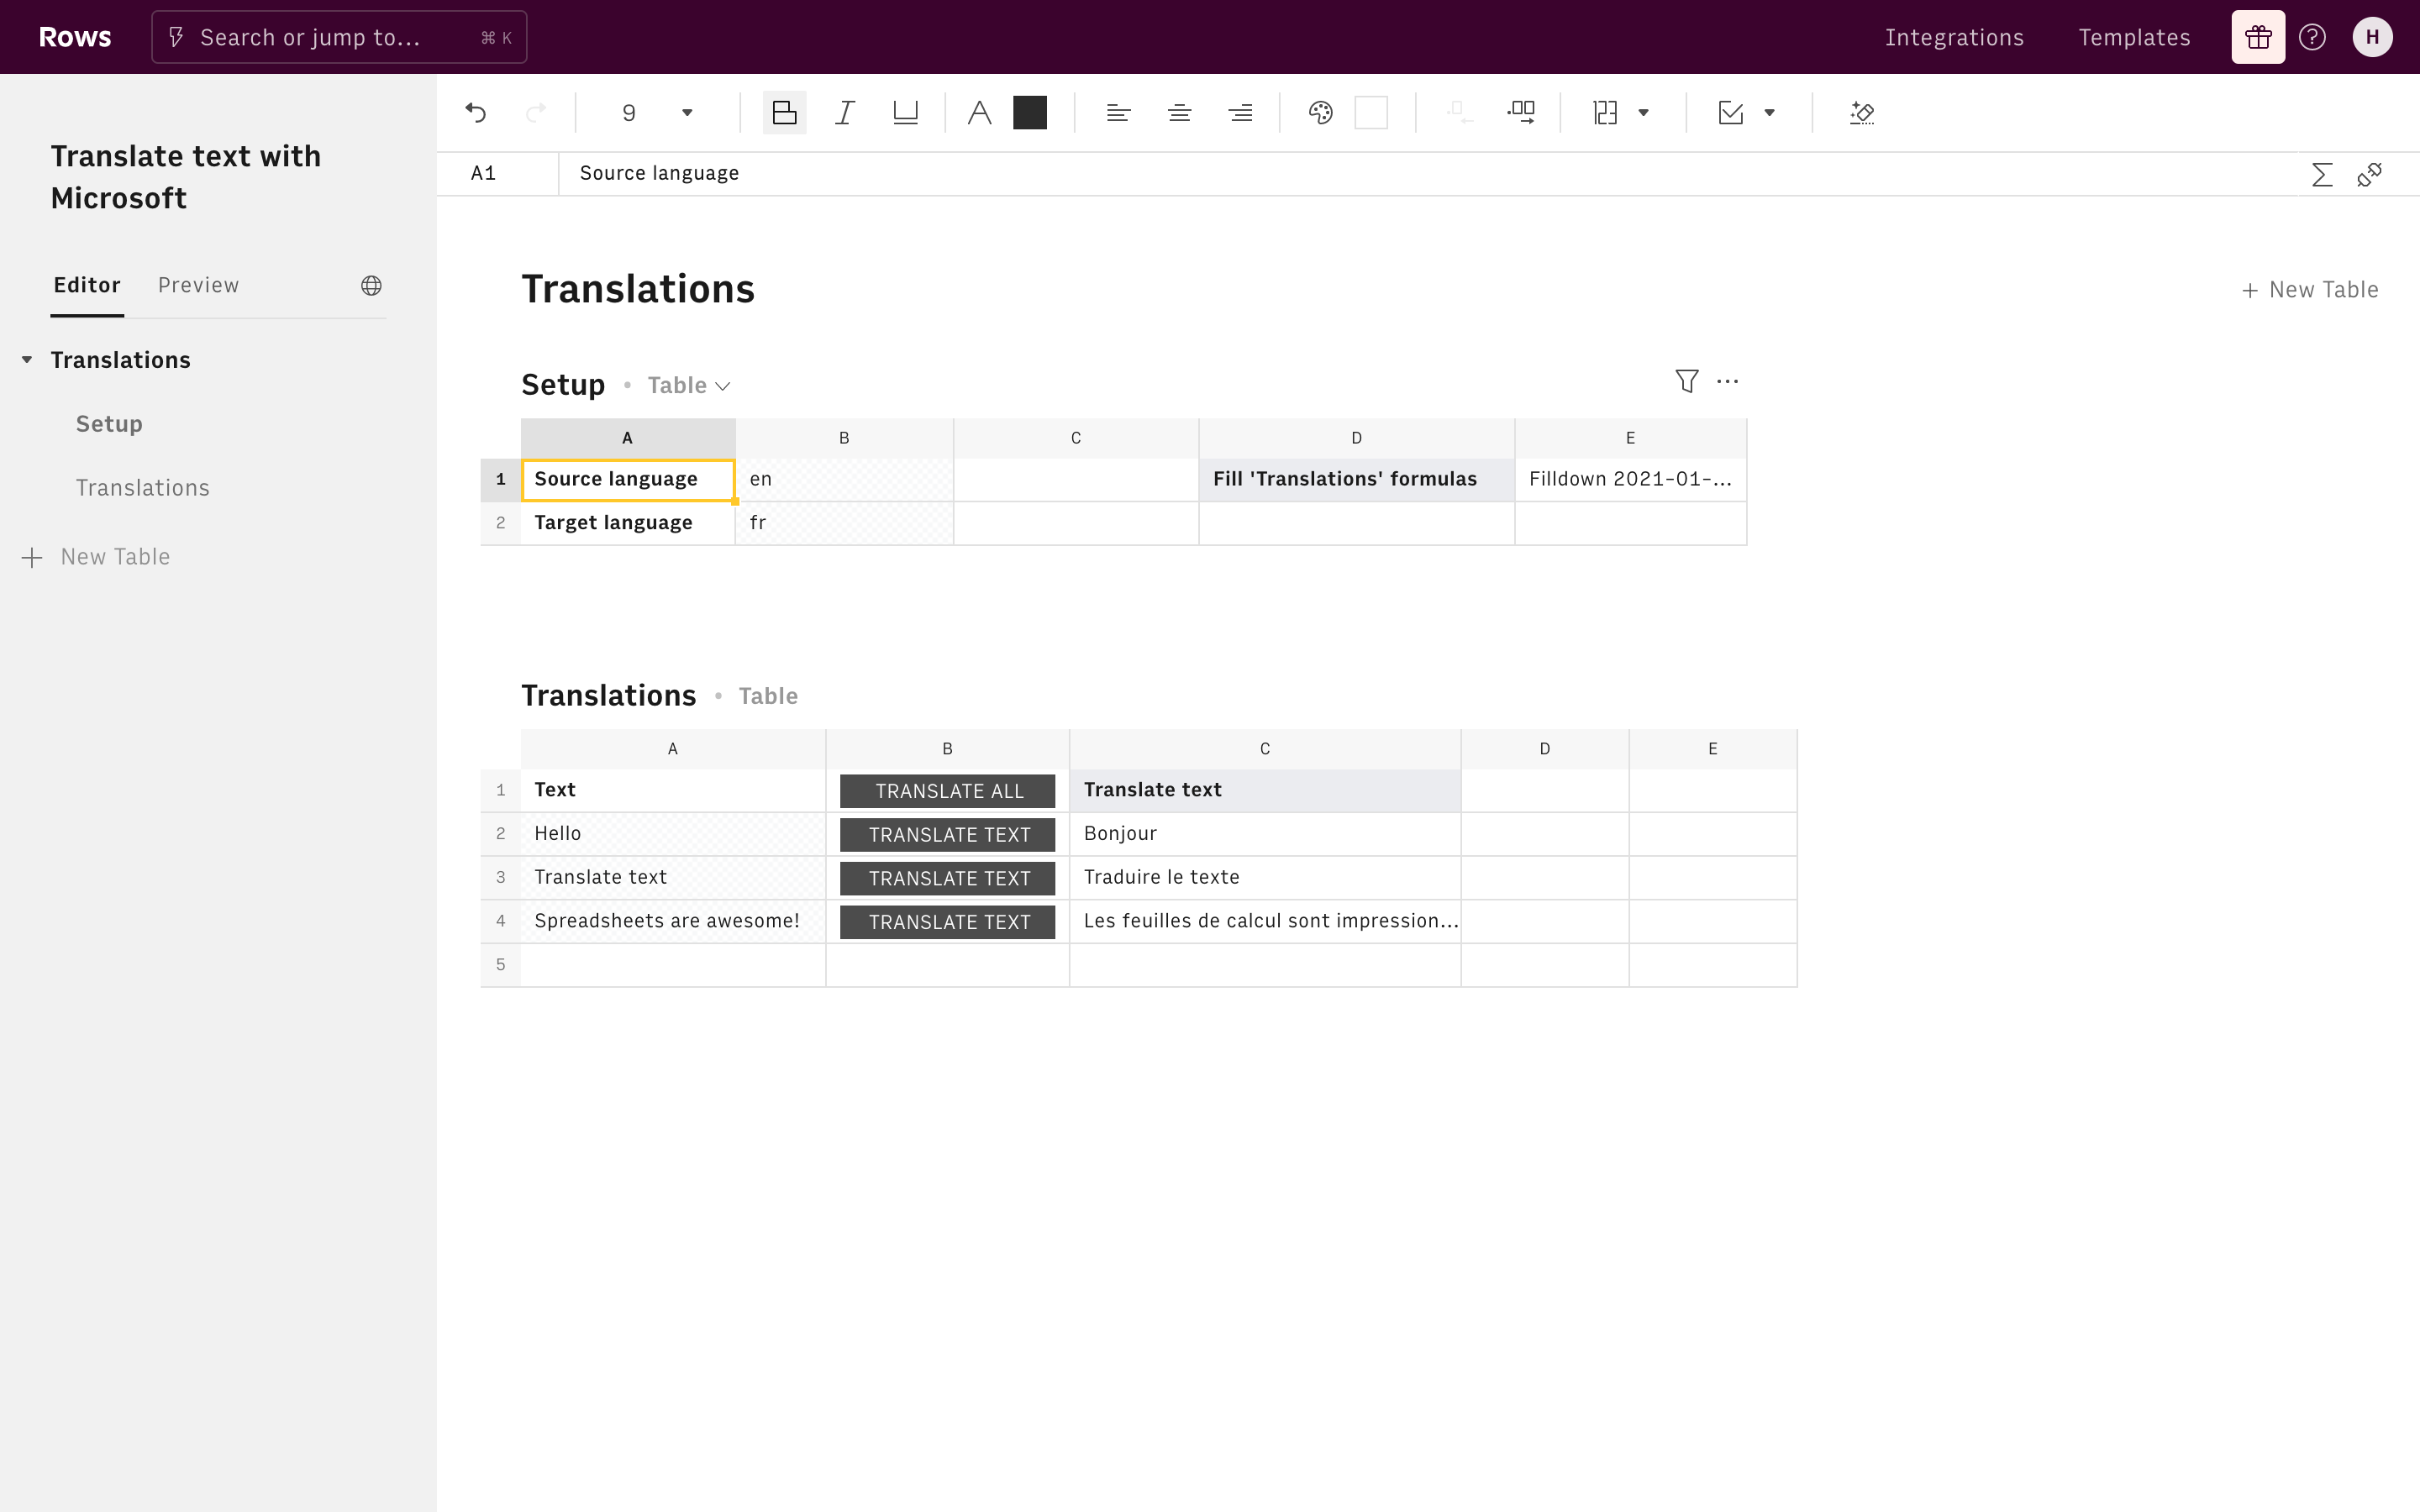 Translate text with Microsoft Editor